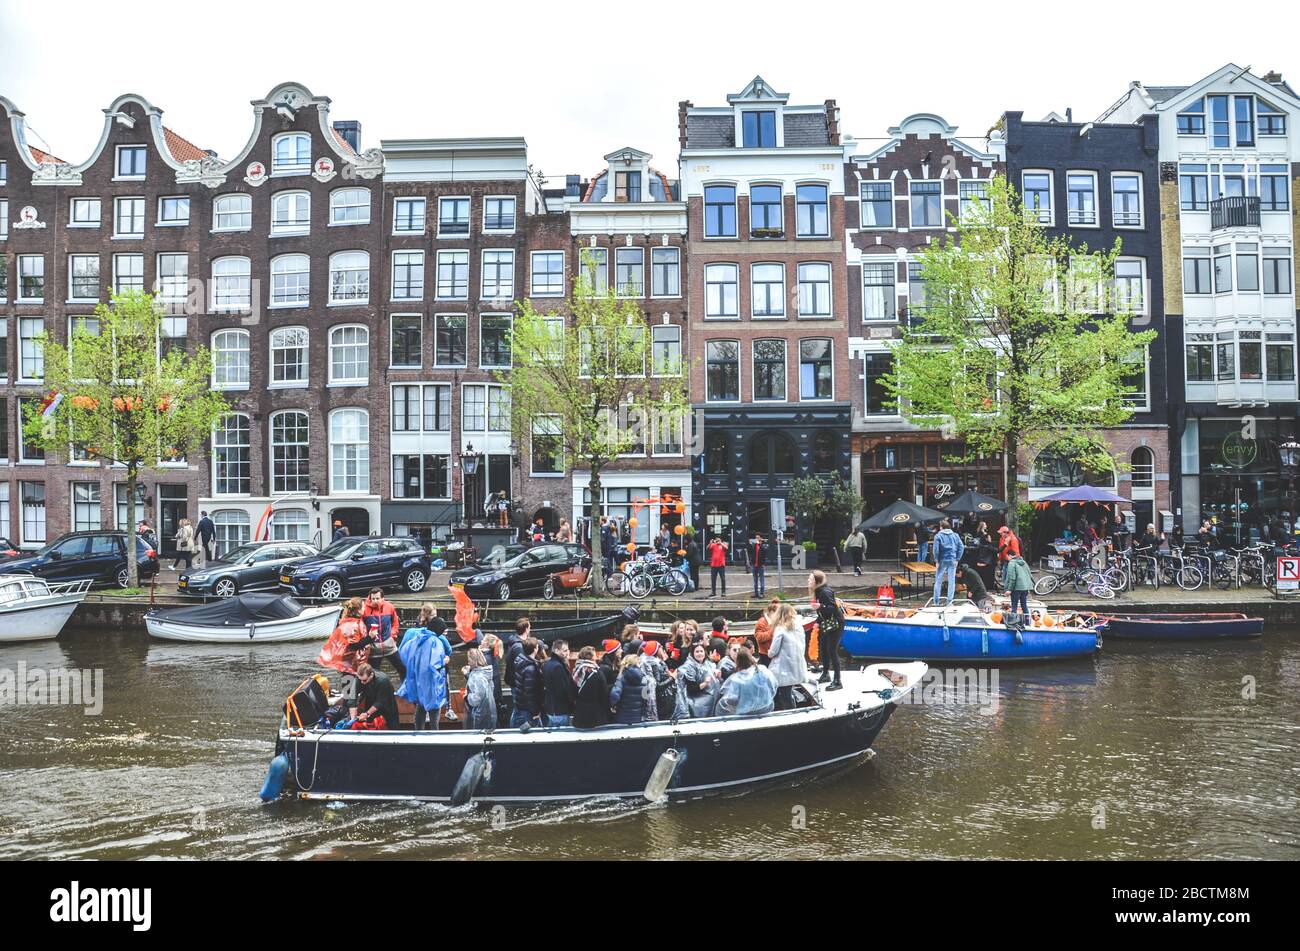 Amsterdam, Netherlands - April 27, 2019: People on party boats celebrating the Kings day, Koningsdag, the birthday of the Dutch King Willem-Alexander. Overcrowded boats on the canal. Stock Photo